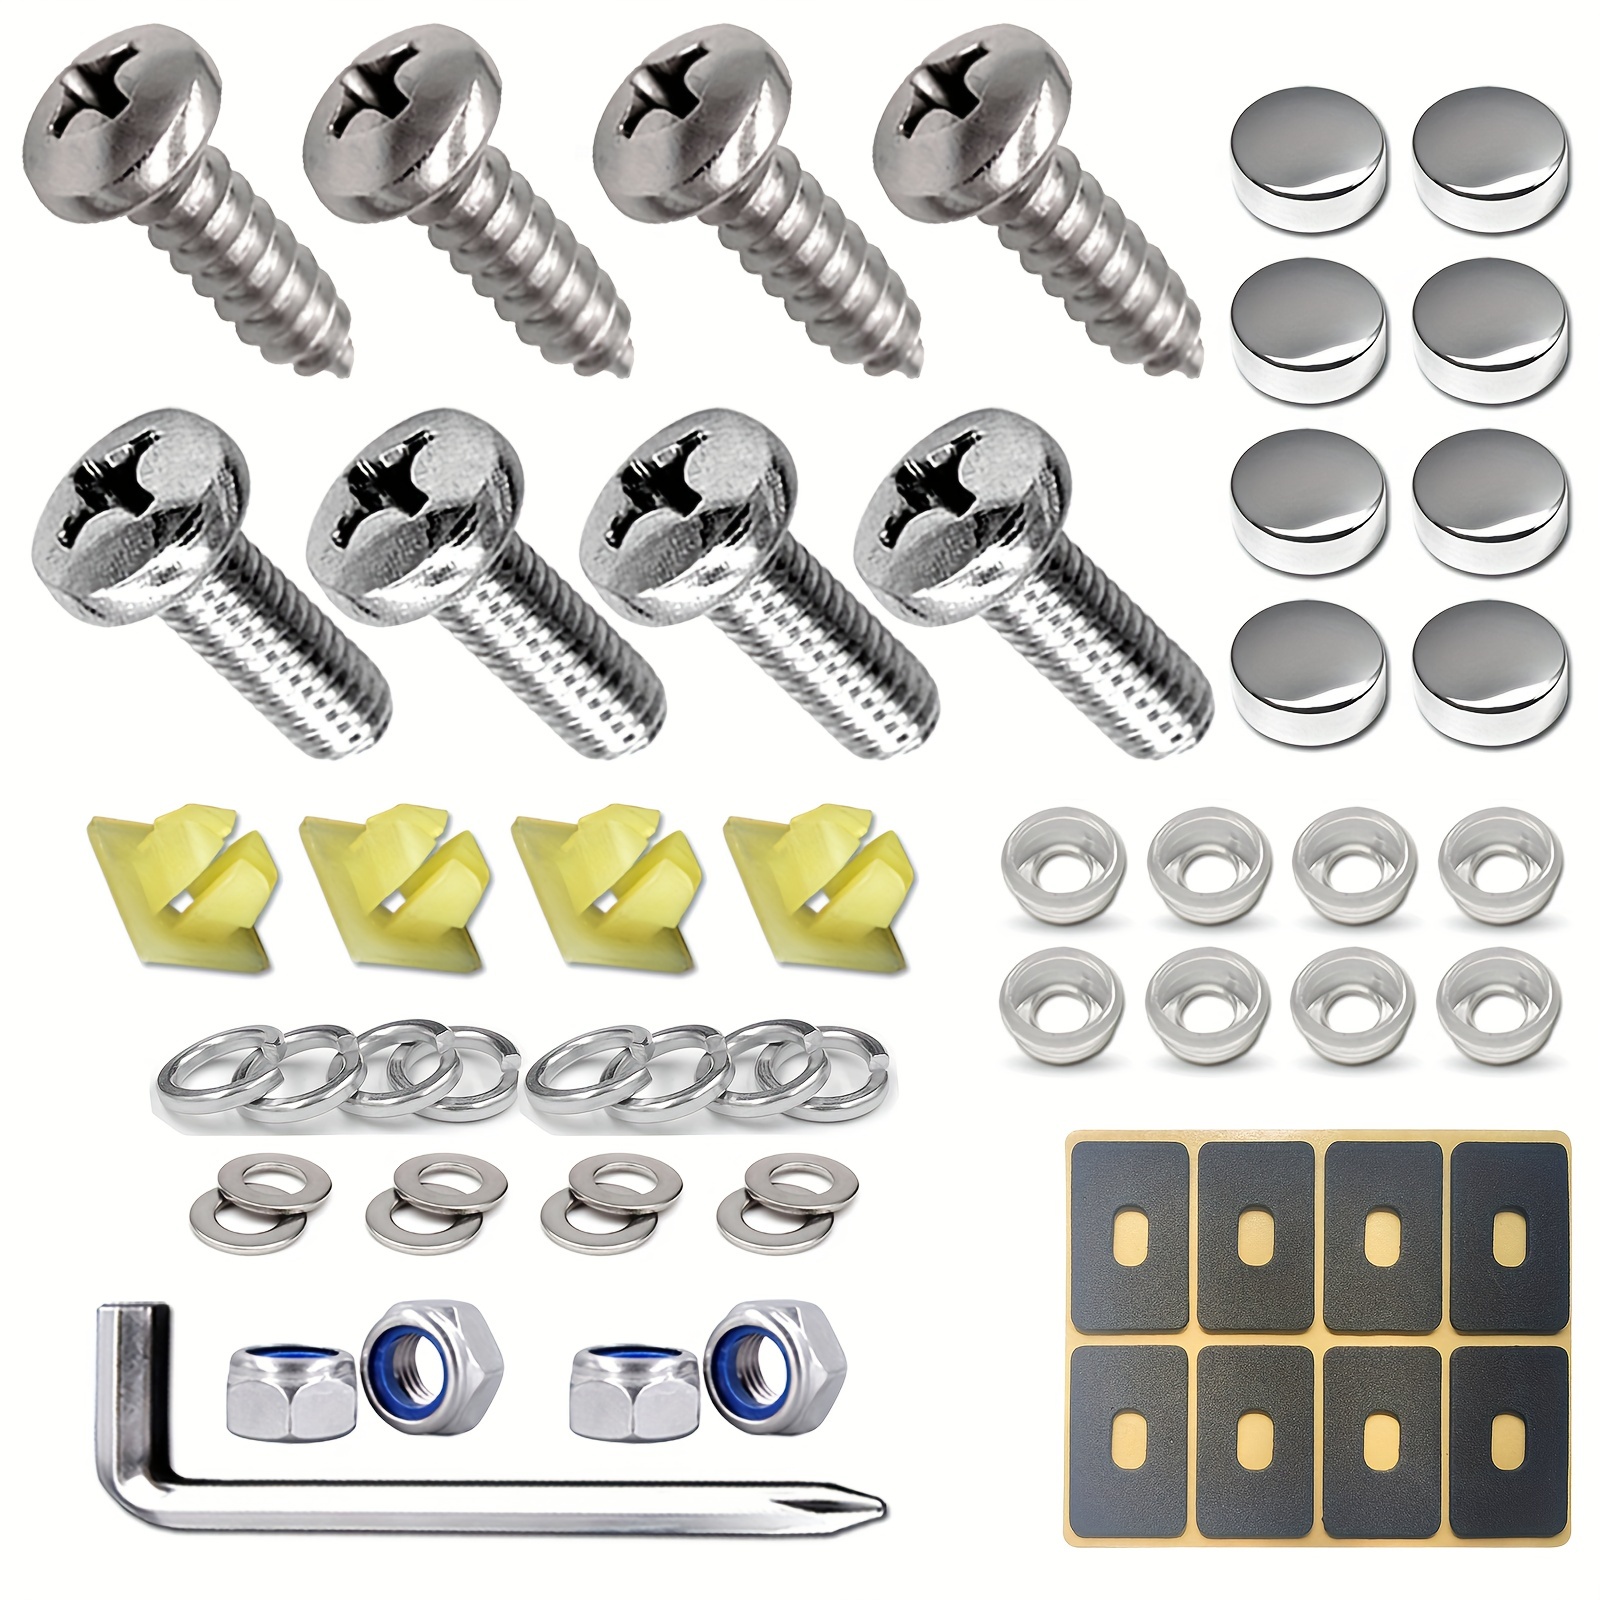 Stainless Steel License Plate Screws Kit Rust Proof Car Tag Bolts